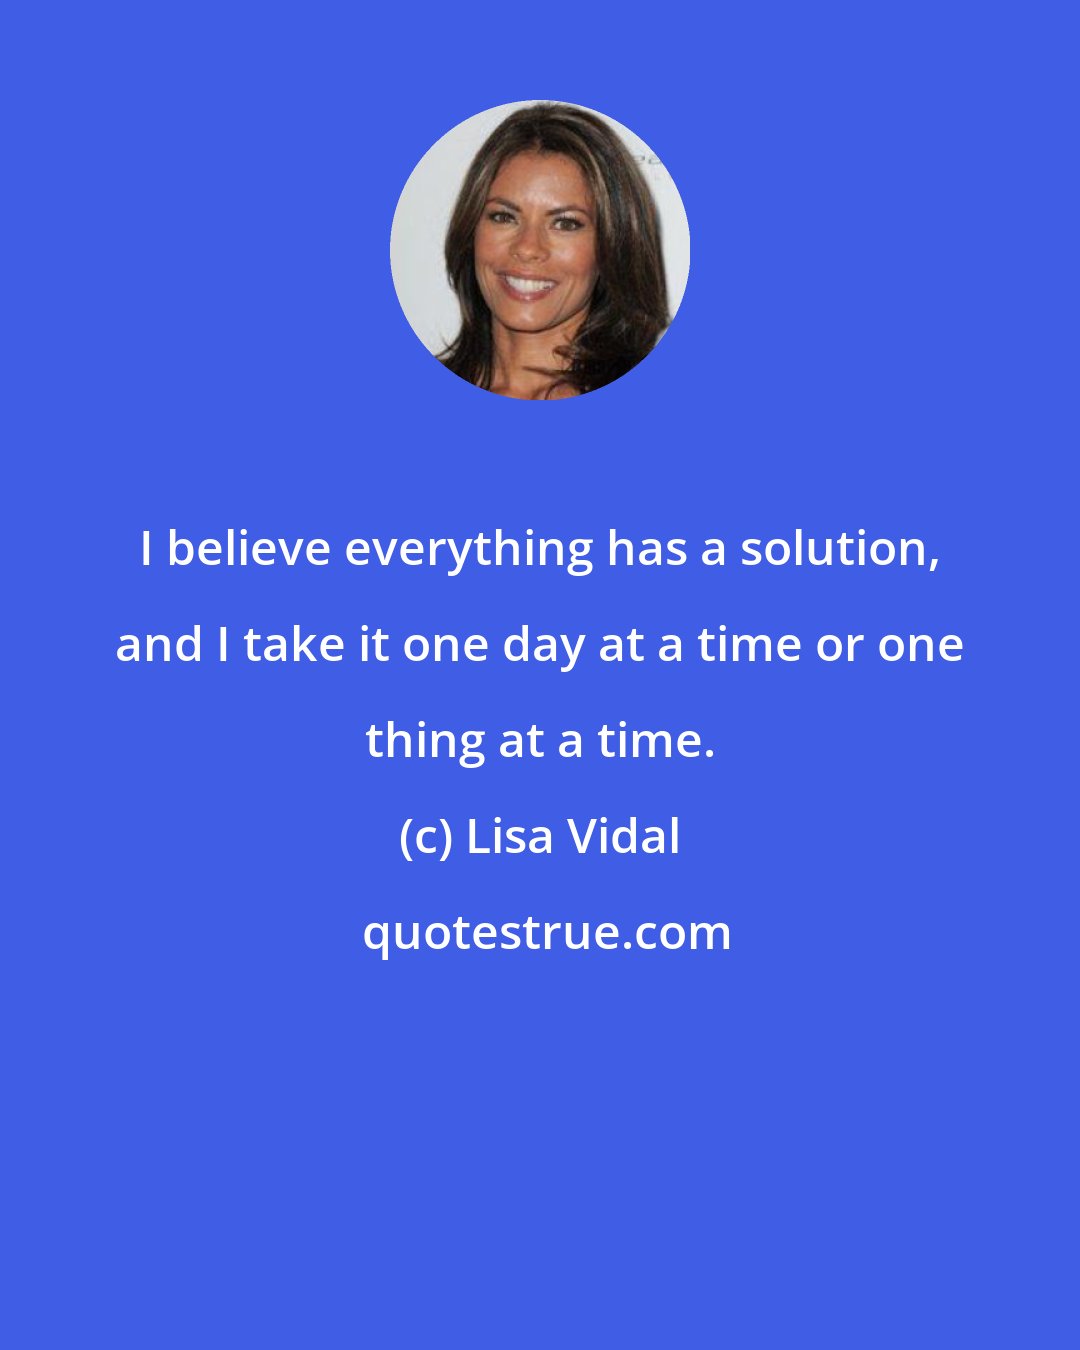 Lisa Vidal: I believe everything has a solution, and I take it one day at a time or one thing at a time.